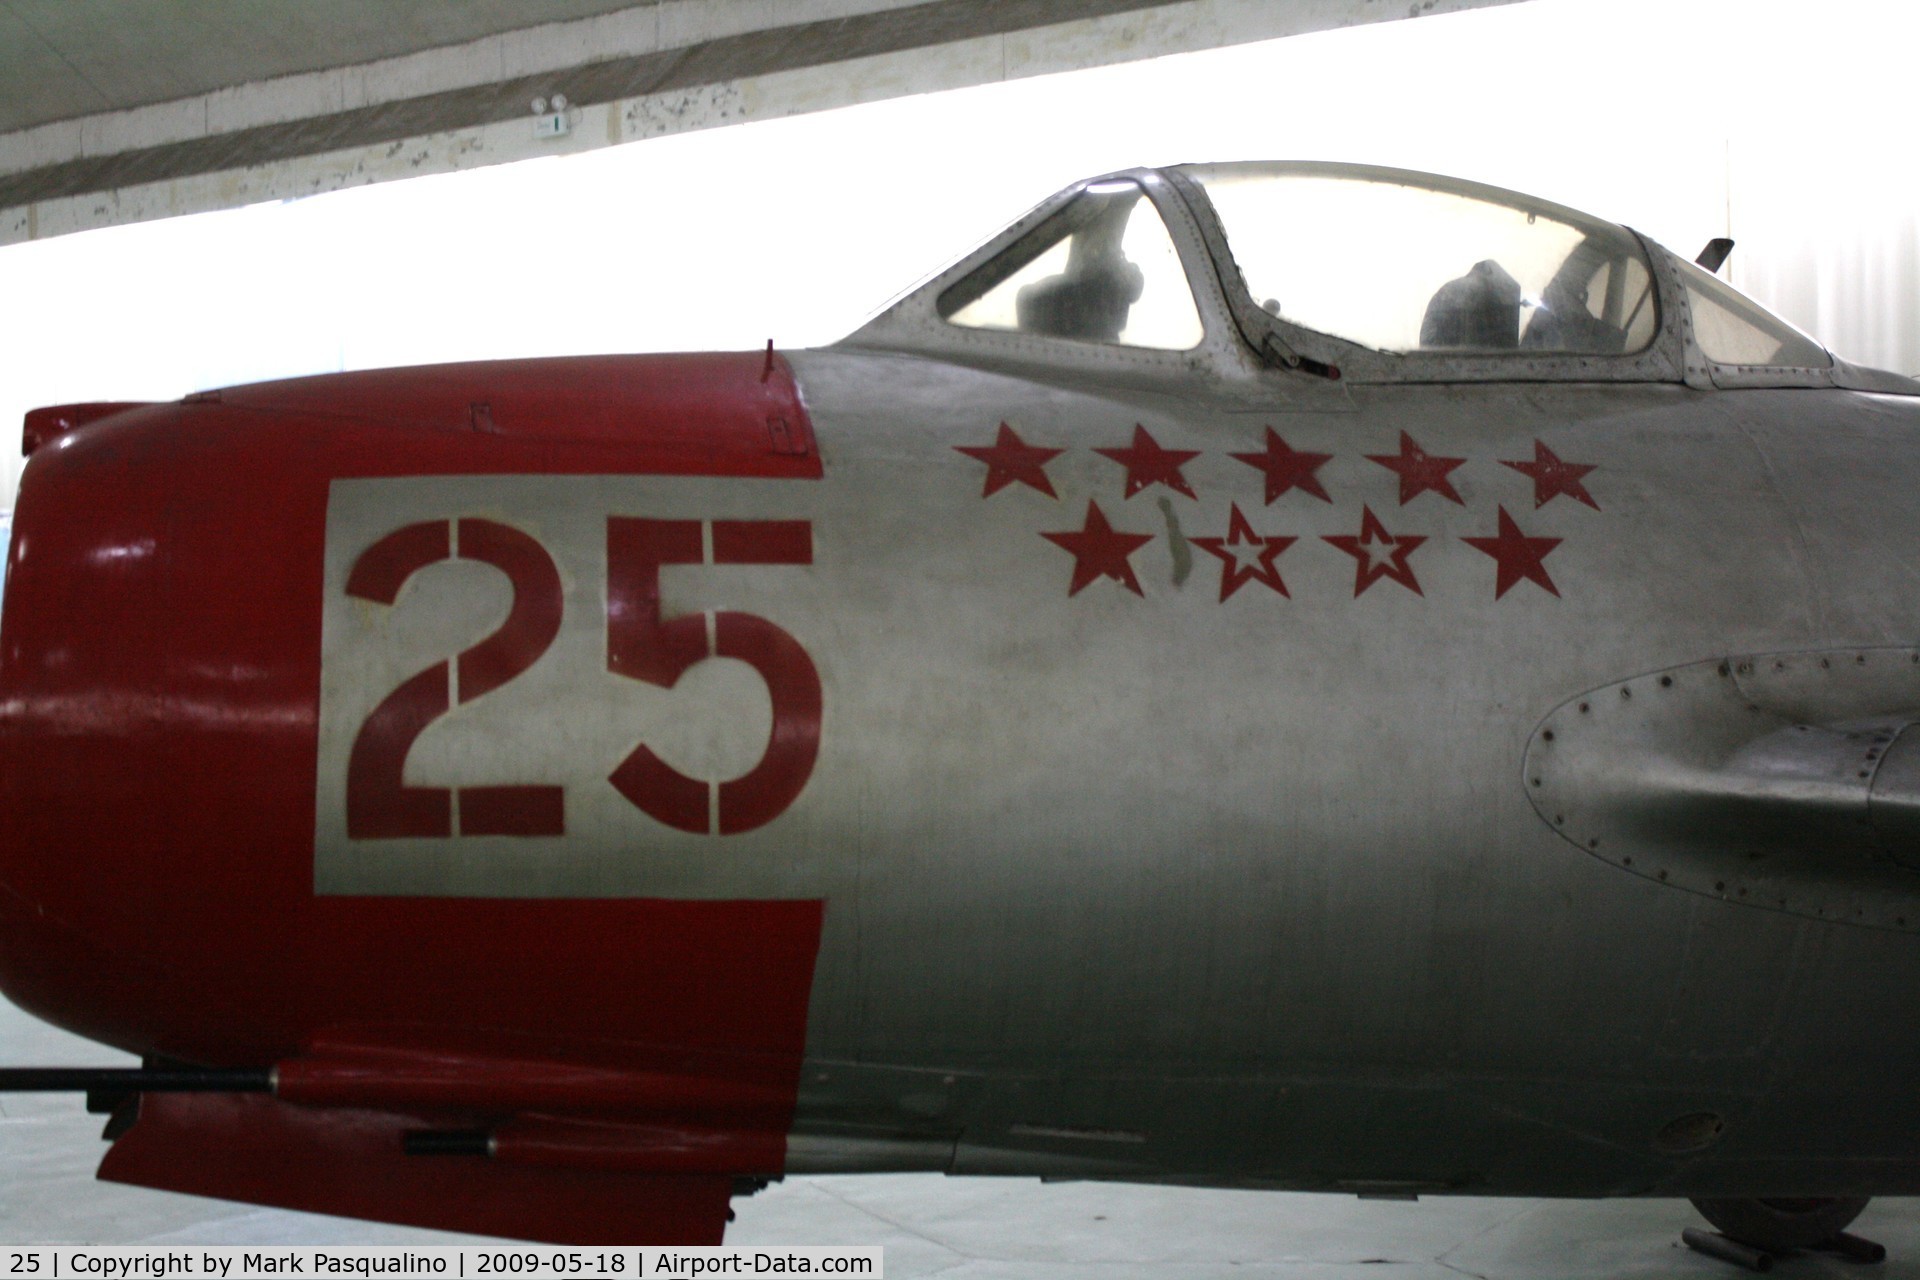 25, Mikoyan-Gurevich MiG-15 C/N Not found, MiG-15  Located at Datangshan, China